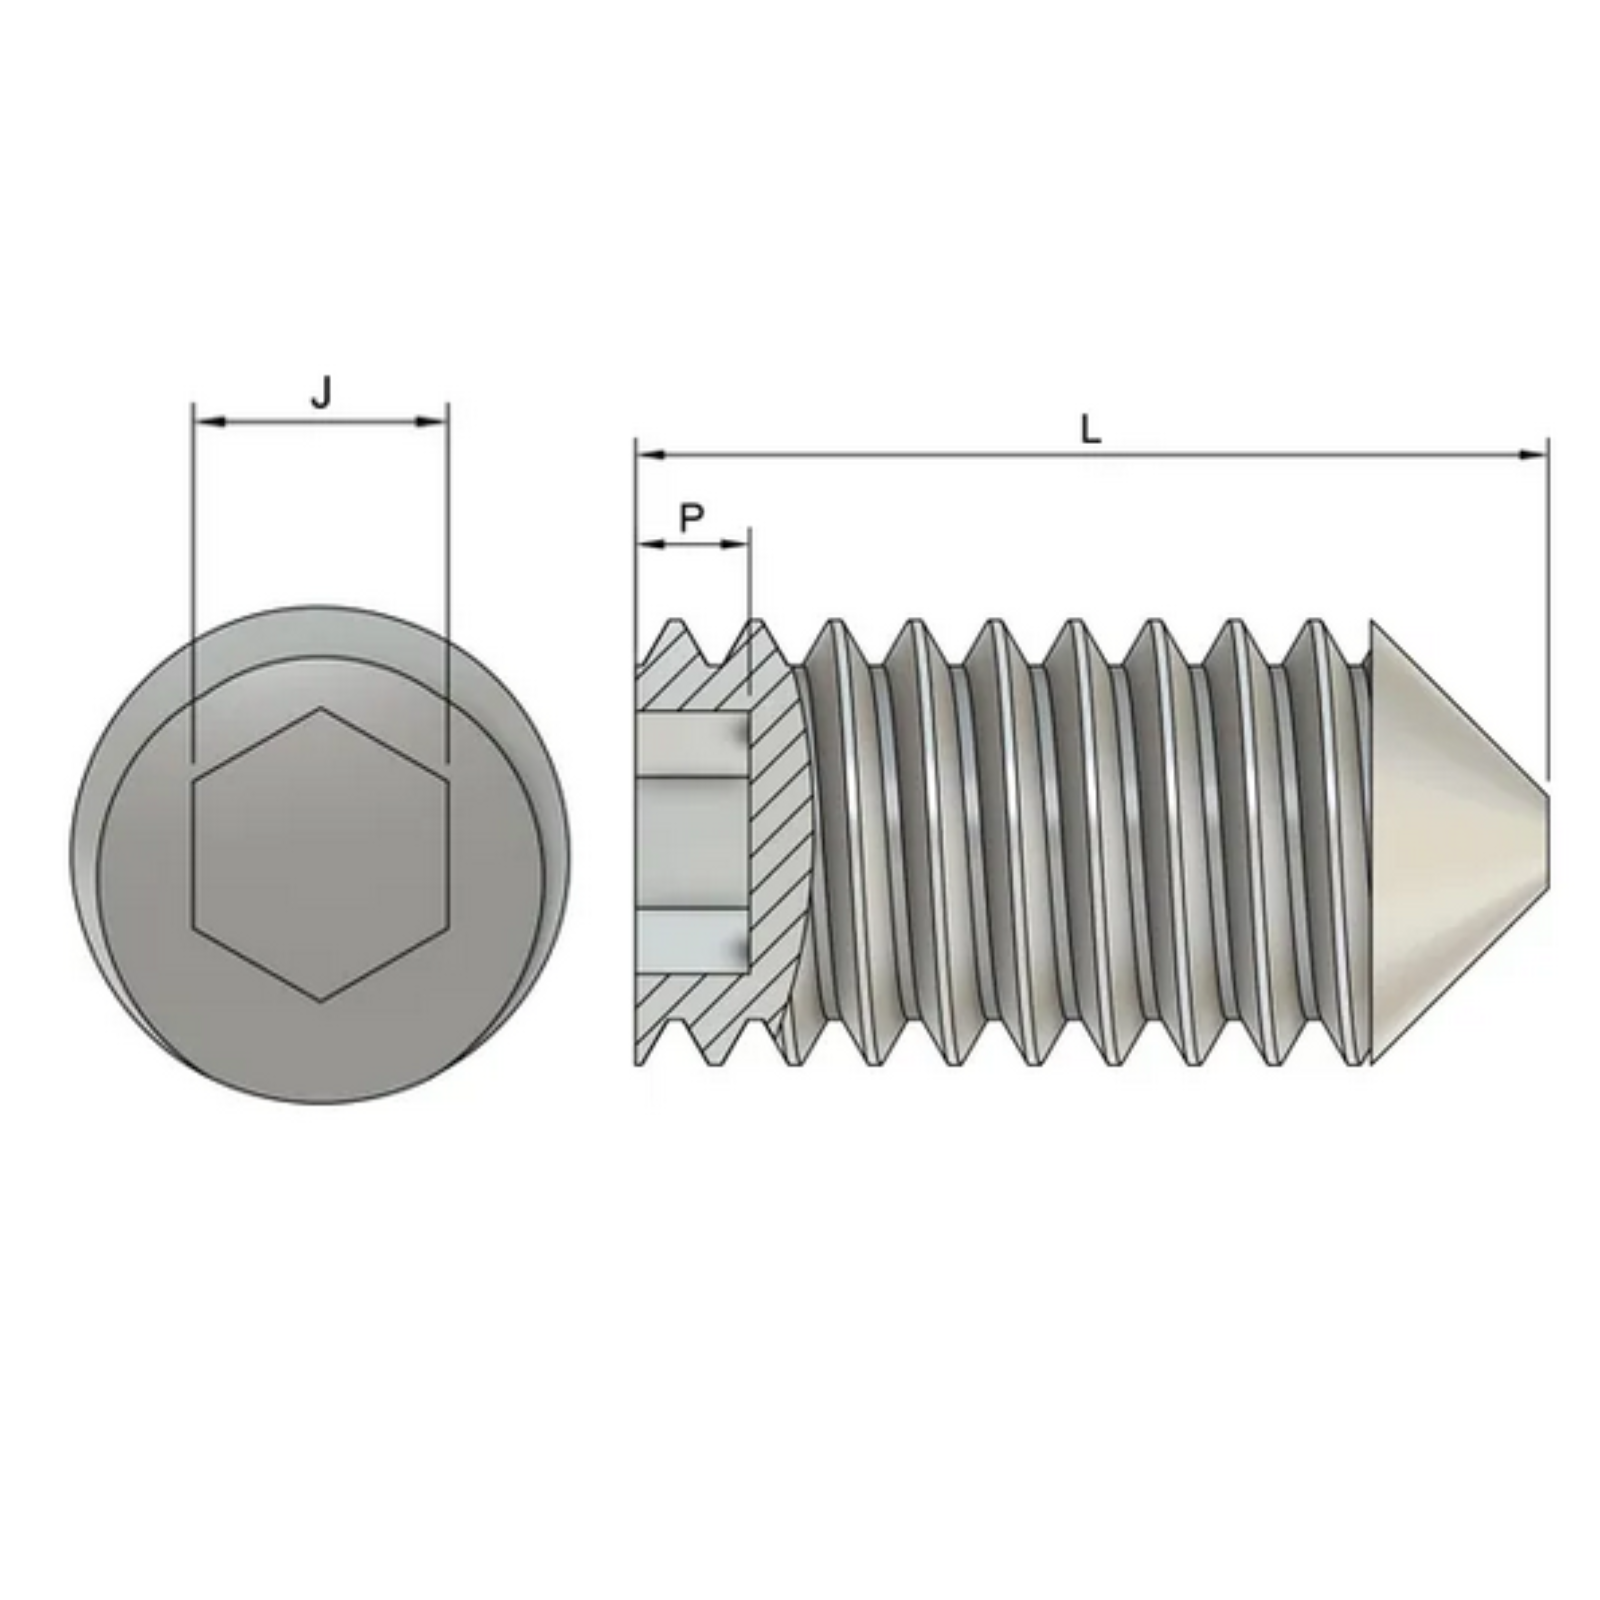 M4 Cone Point Set / Grub Screws (DIN 914) - Stainless Steel (A2)